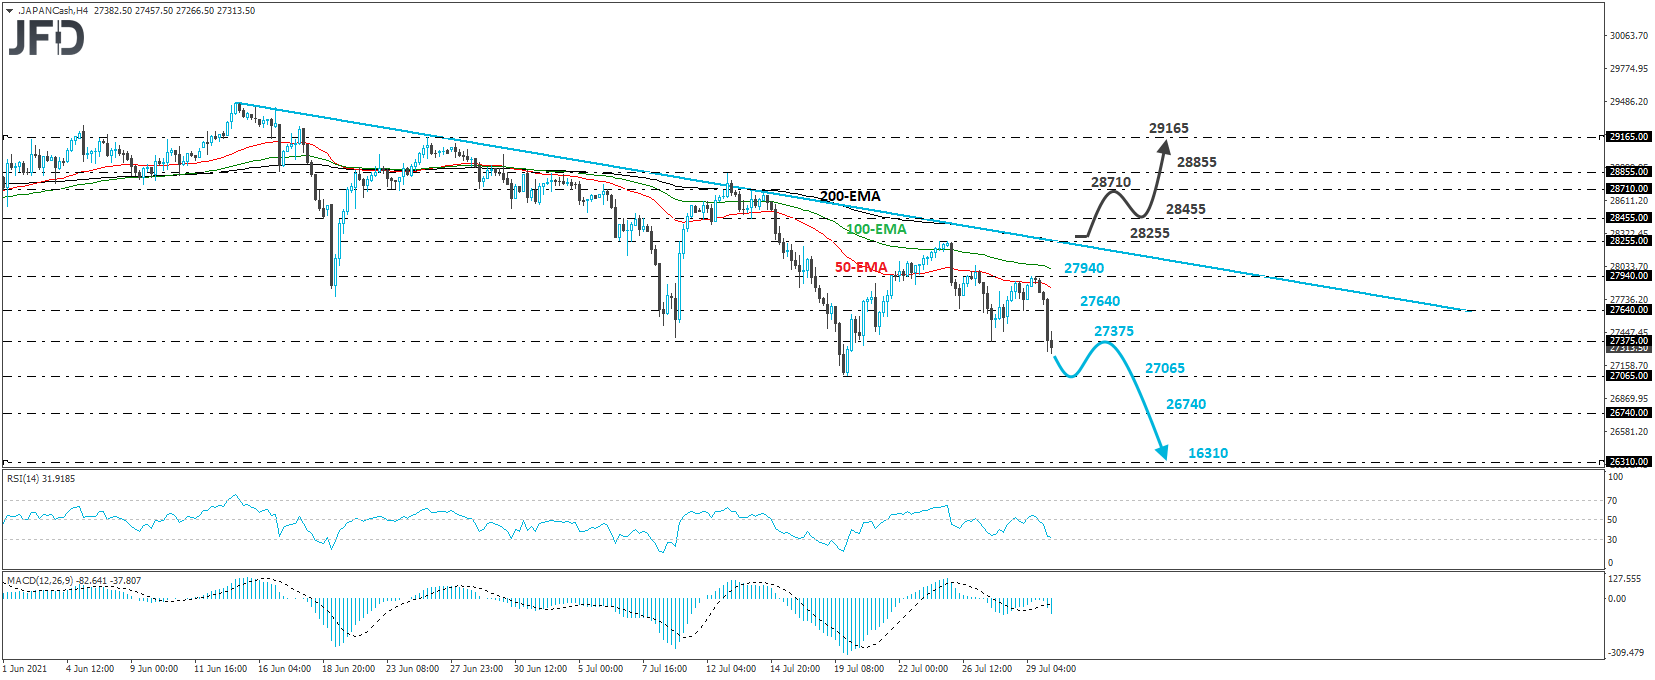 Japan's Nikkei 225 cash index 4-hour chart technical analysis